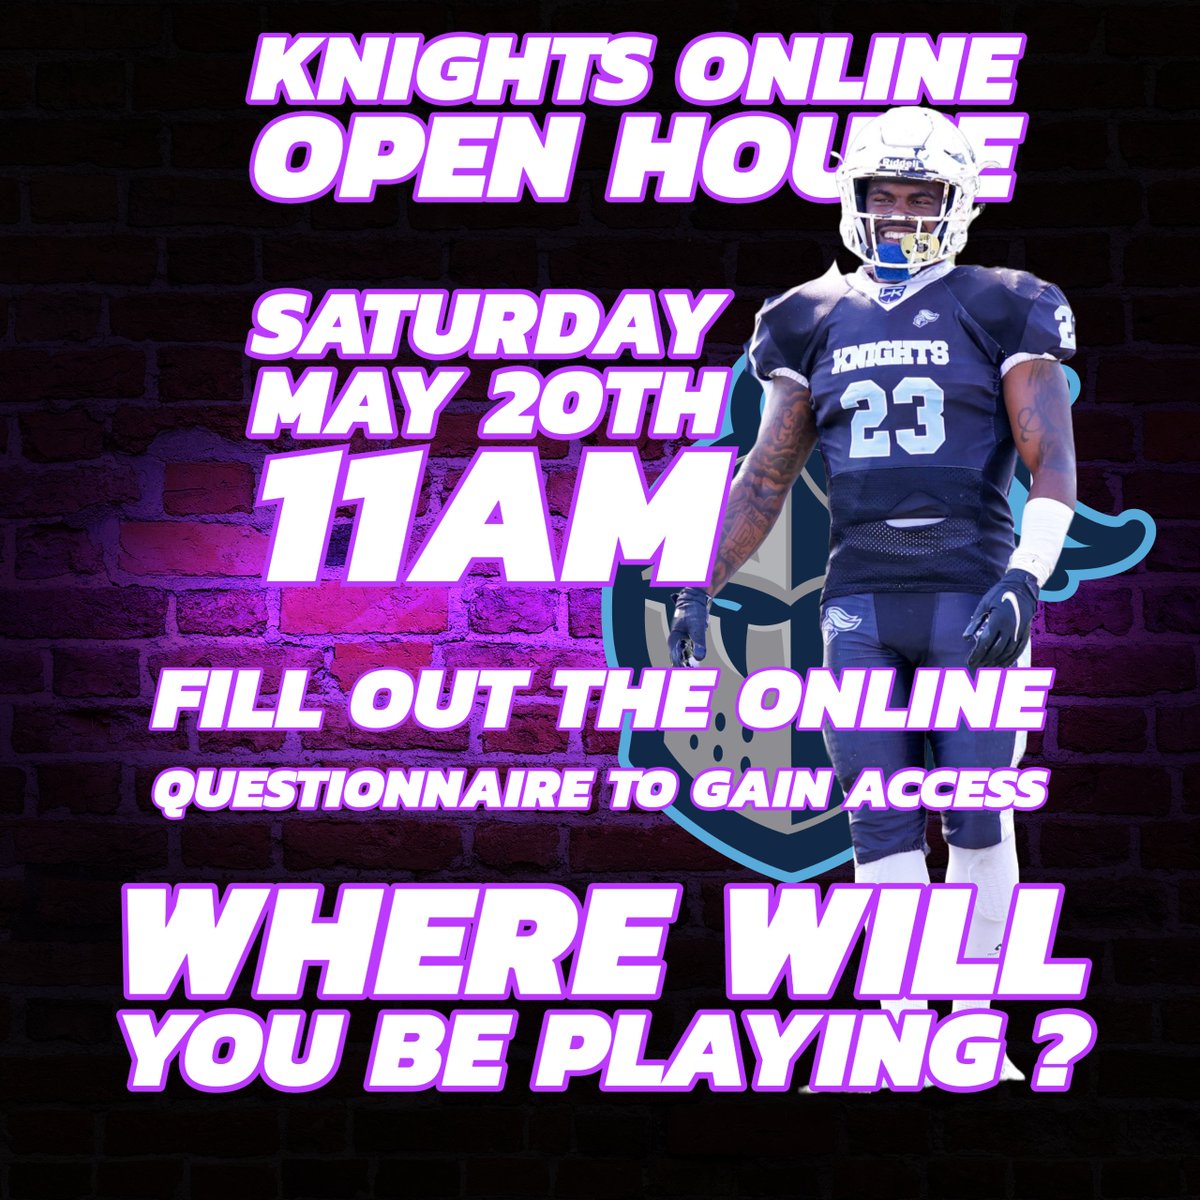 2023 recruits who are interested in Community Christian Georgia Football may fill out the contact form and receive the link to the open house. docs.google.com/forms/d/e/1FAI…